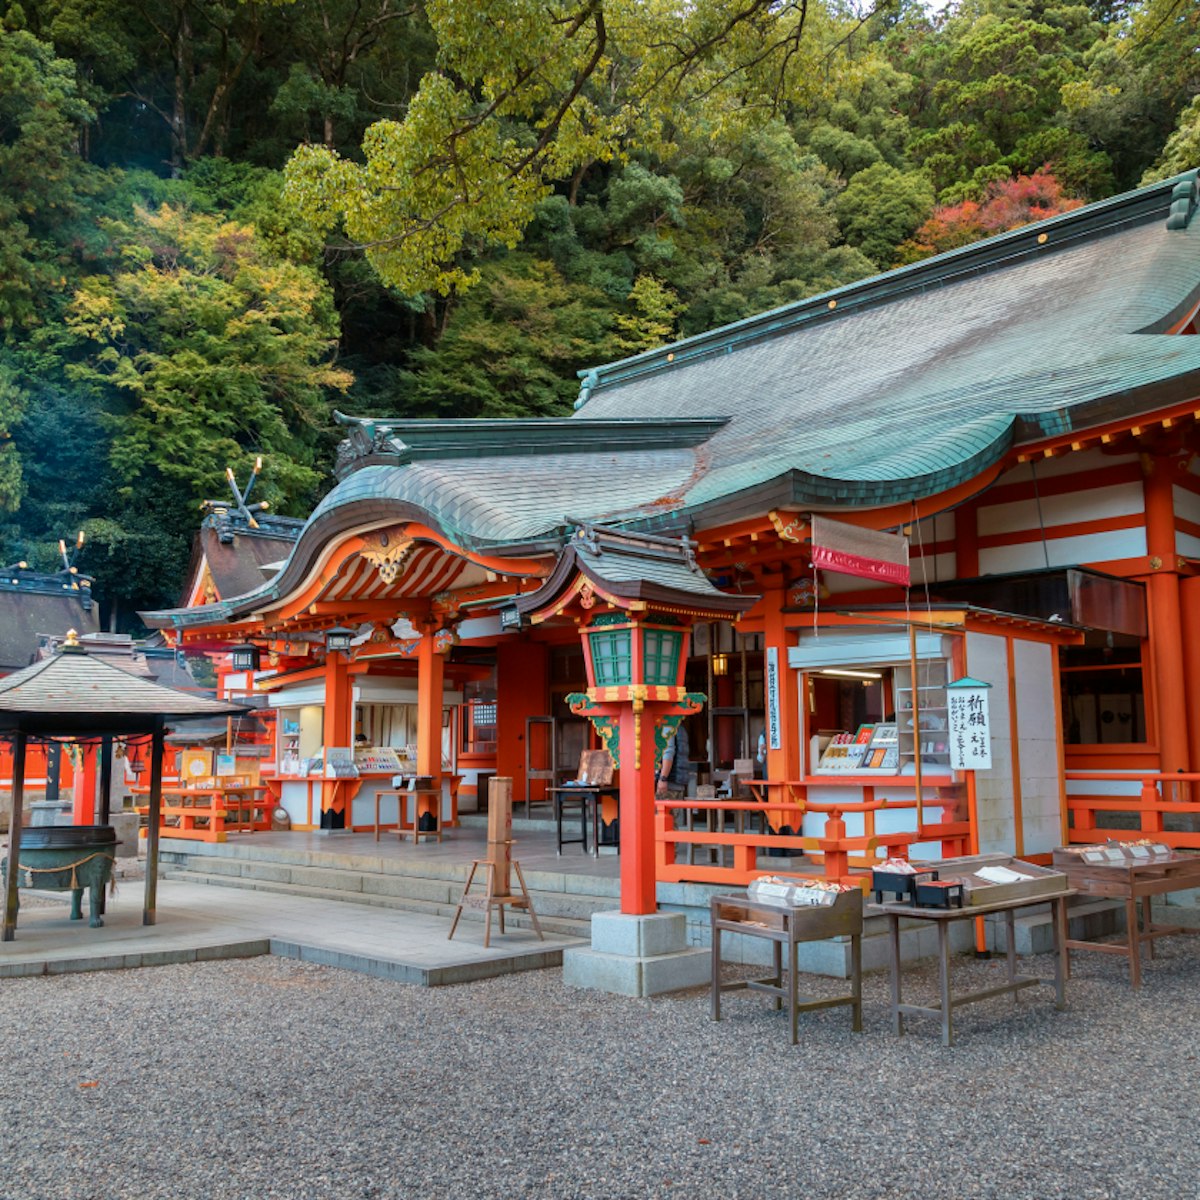 WAKAYAMA, JAPAN - NOVEMBER 19, 2015: Kumano Nachi Taisha Grand Shrine located in Nachi Katsuura Town, it's one the three most important Grand Shrines of Kumano region; Shutterstock ID 395348893; Your name (First / Last): Laura Crawford; GL account no.: 65050; Netsuite department name: Online Editorial; Full Product or Project name including edition: Kii Peninsula page online images for BiT